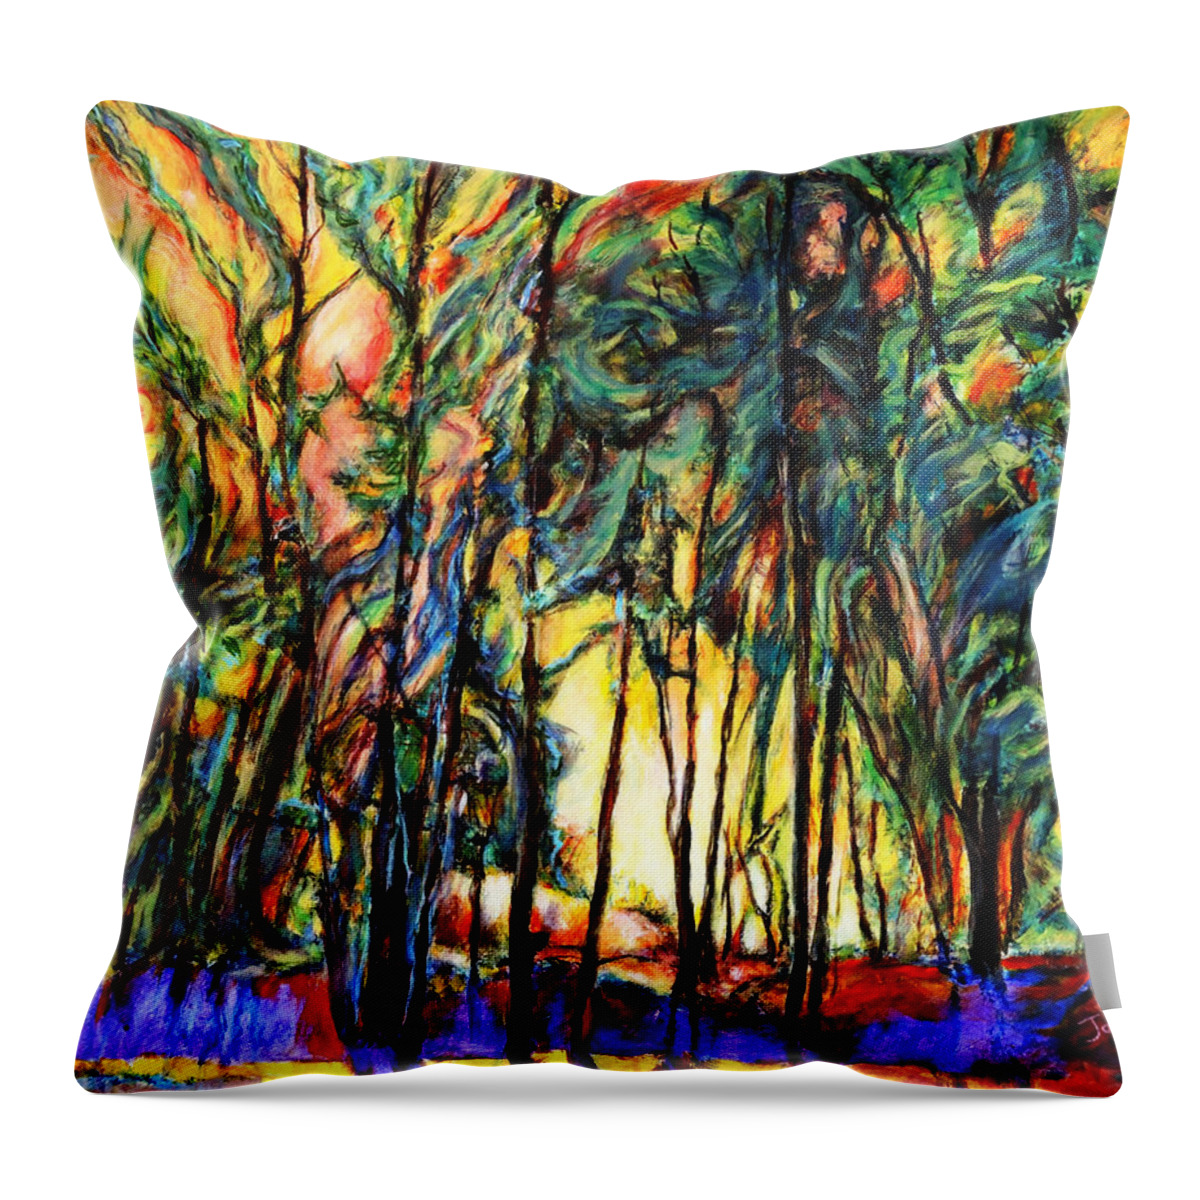 Acrylic Painting Enchanted Forest Sunset Scene Abstract Landscape Throw Pillow featuring the painting Enchanted Forest by John Bohn